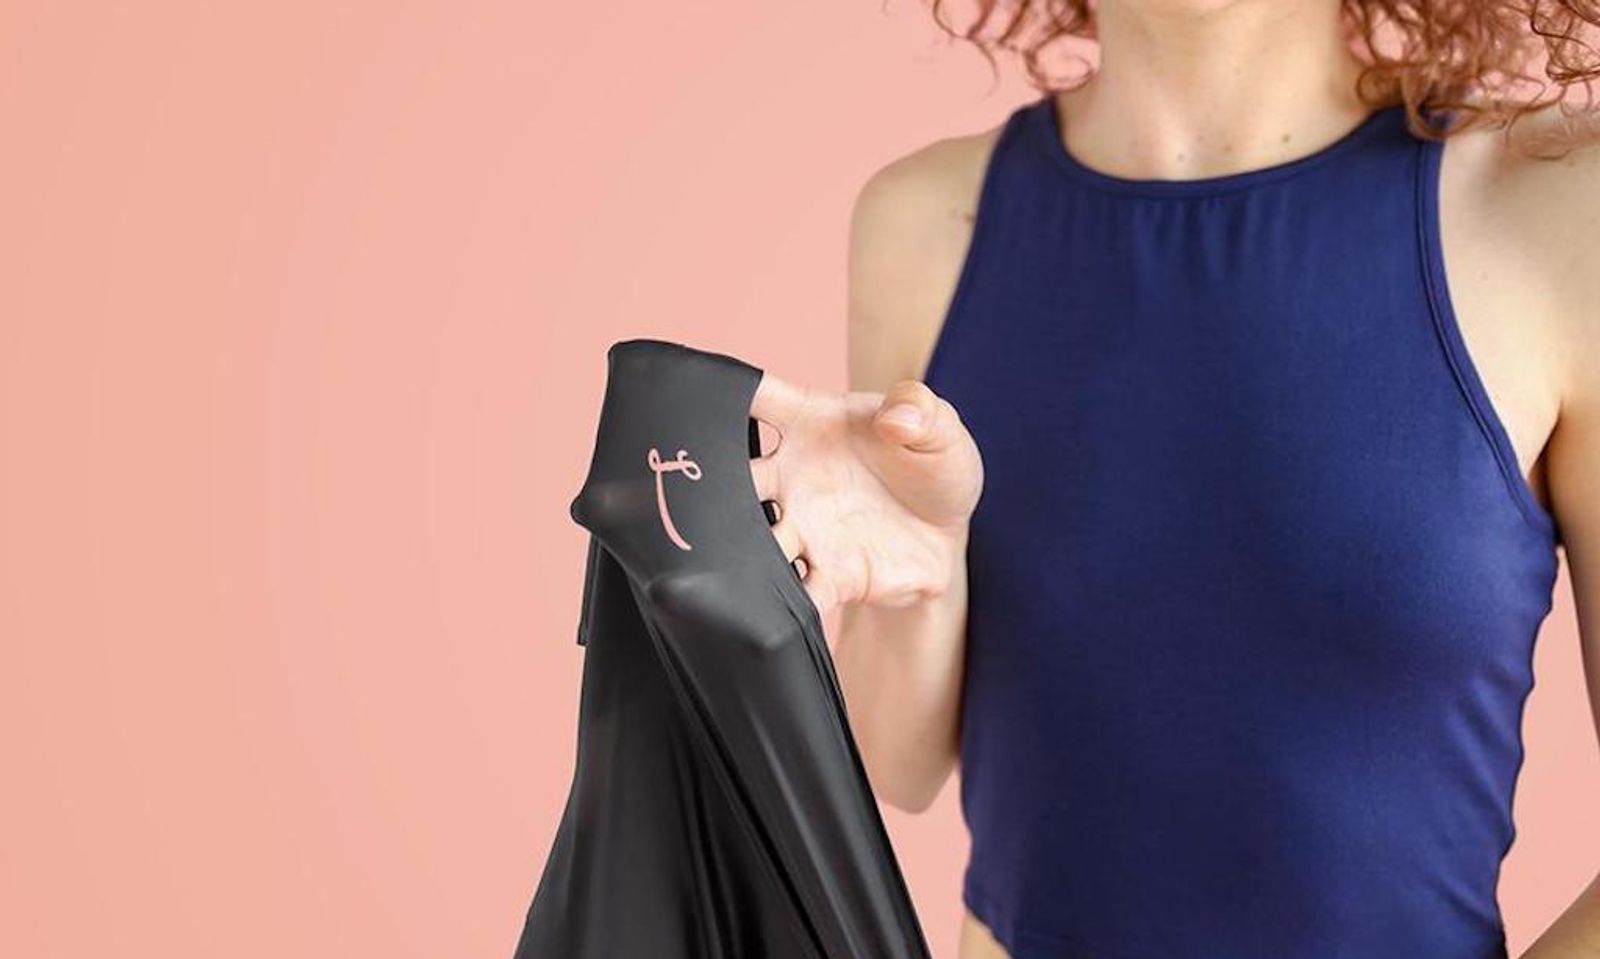 Thin Latex Undergarments Designed as First Lingerie for Oral Sex